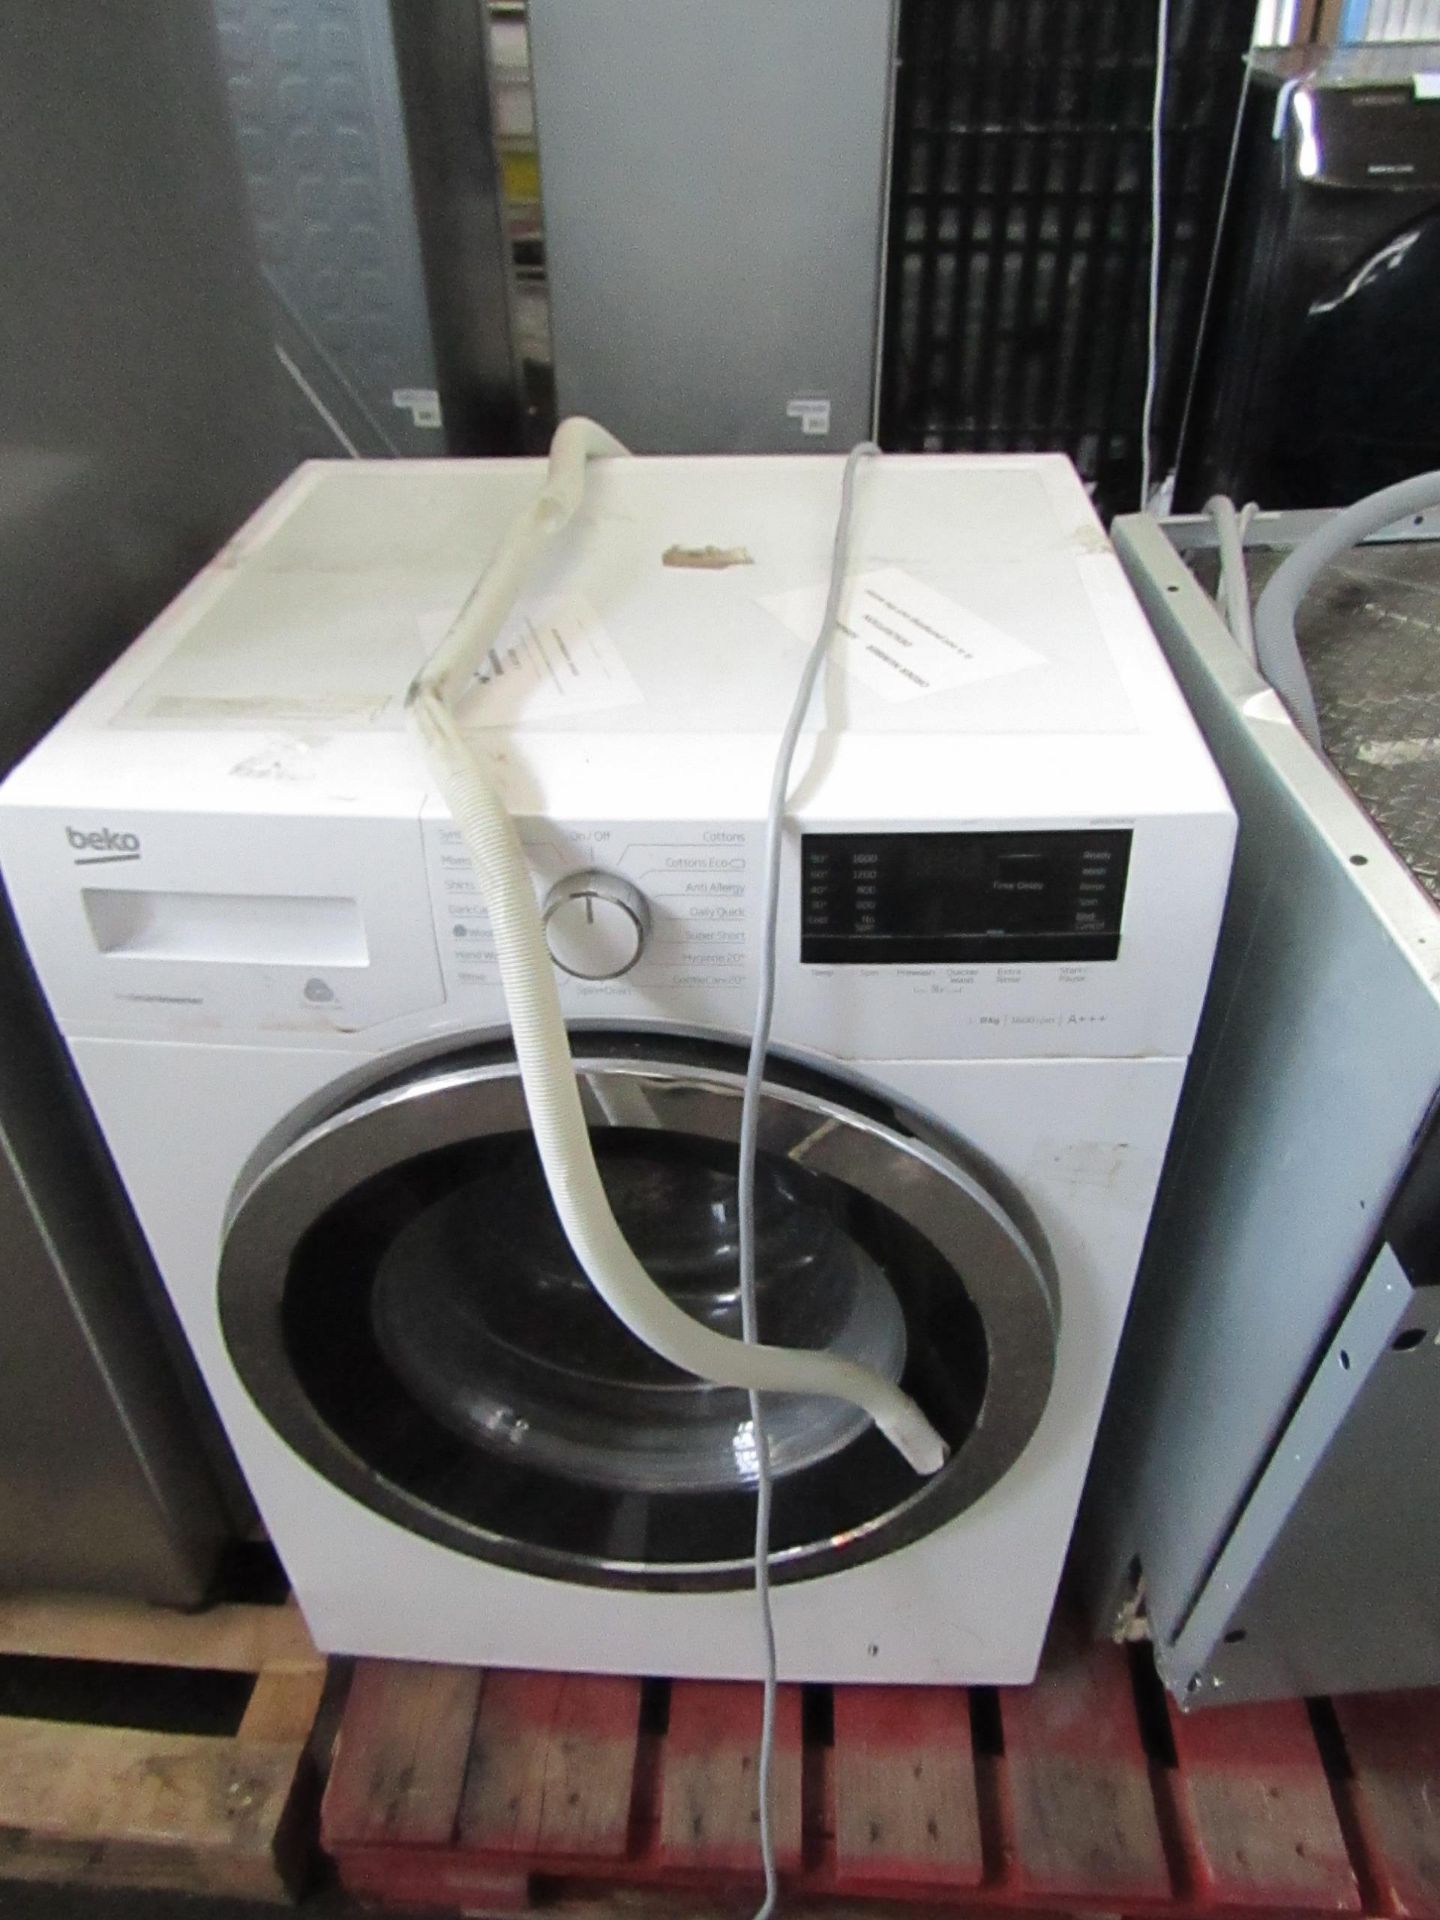 Beko Washing Machine Model No. WR862441W_WH in White RRP ô?279.00, no power when plugged in